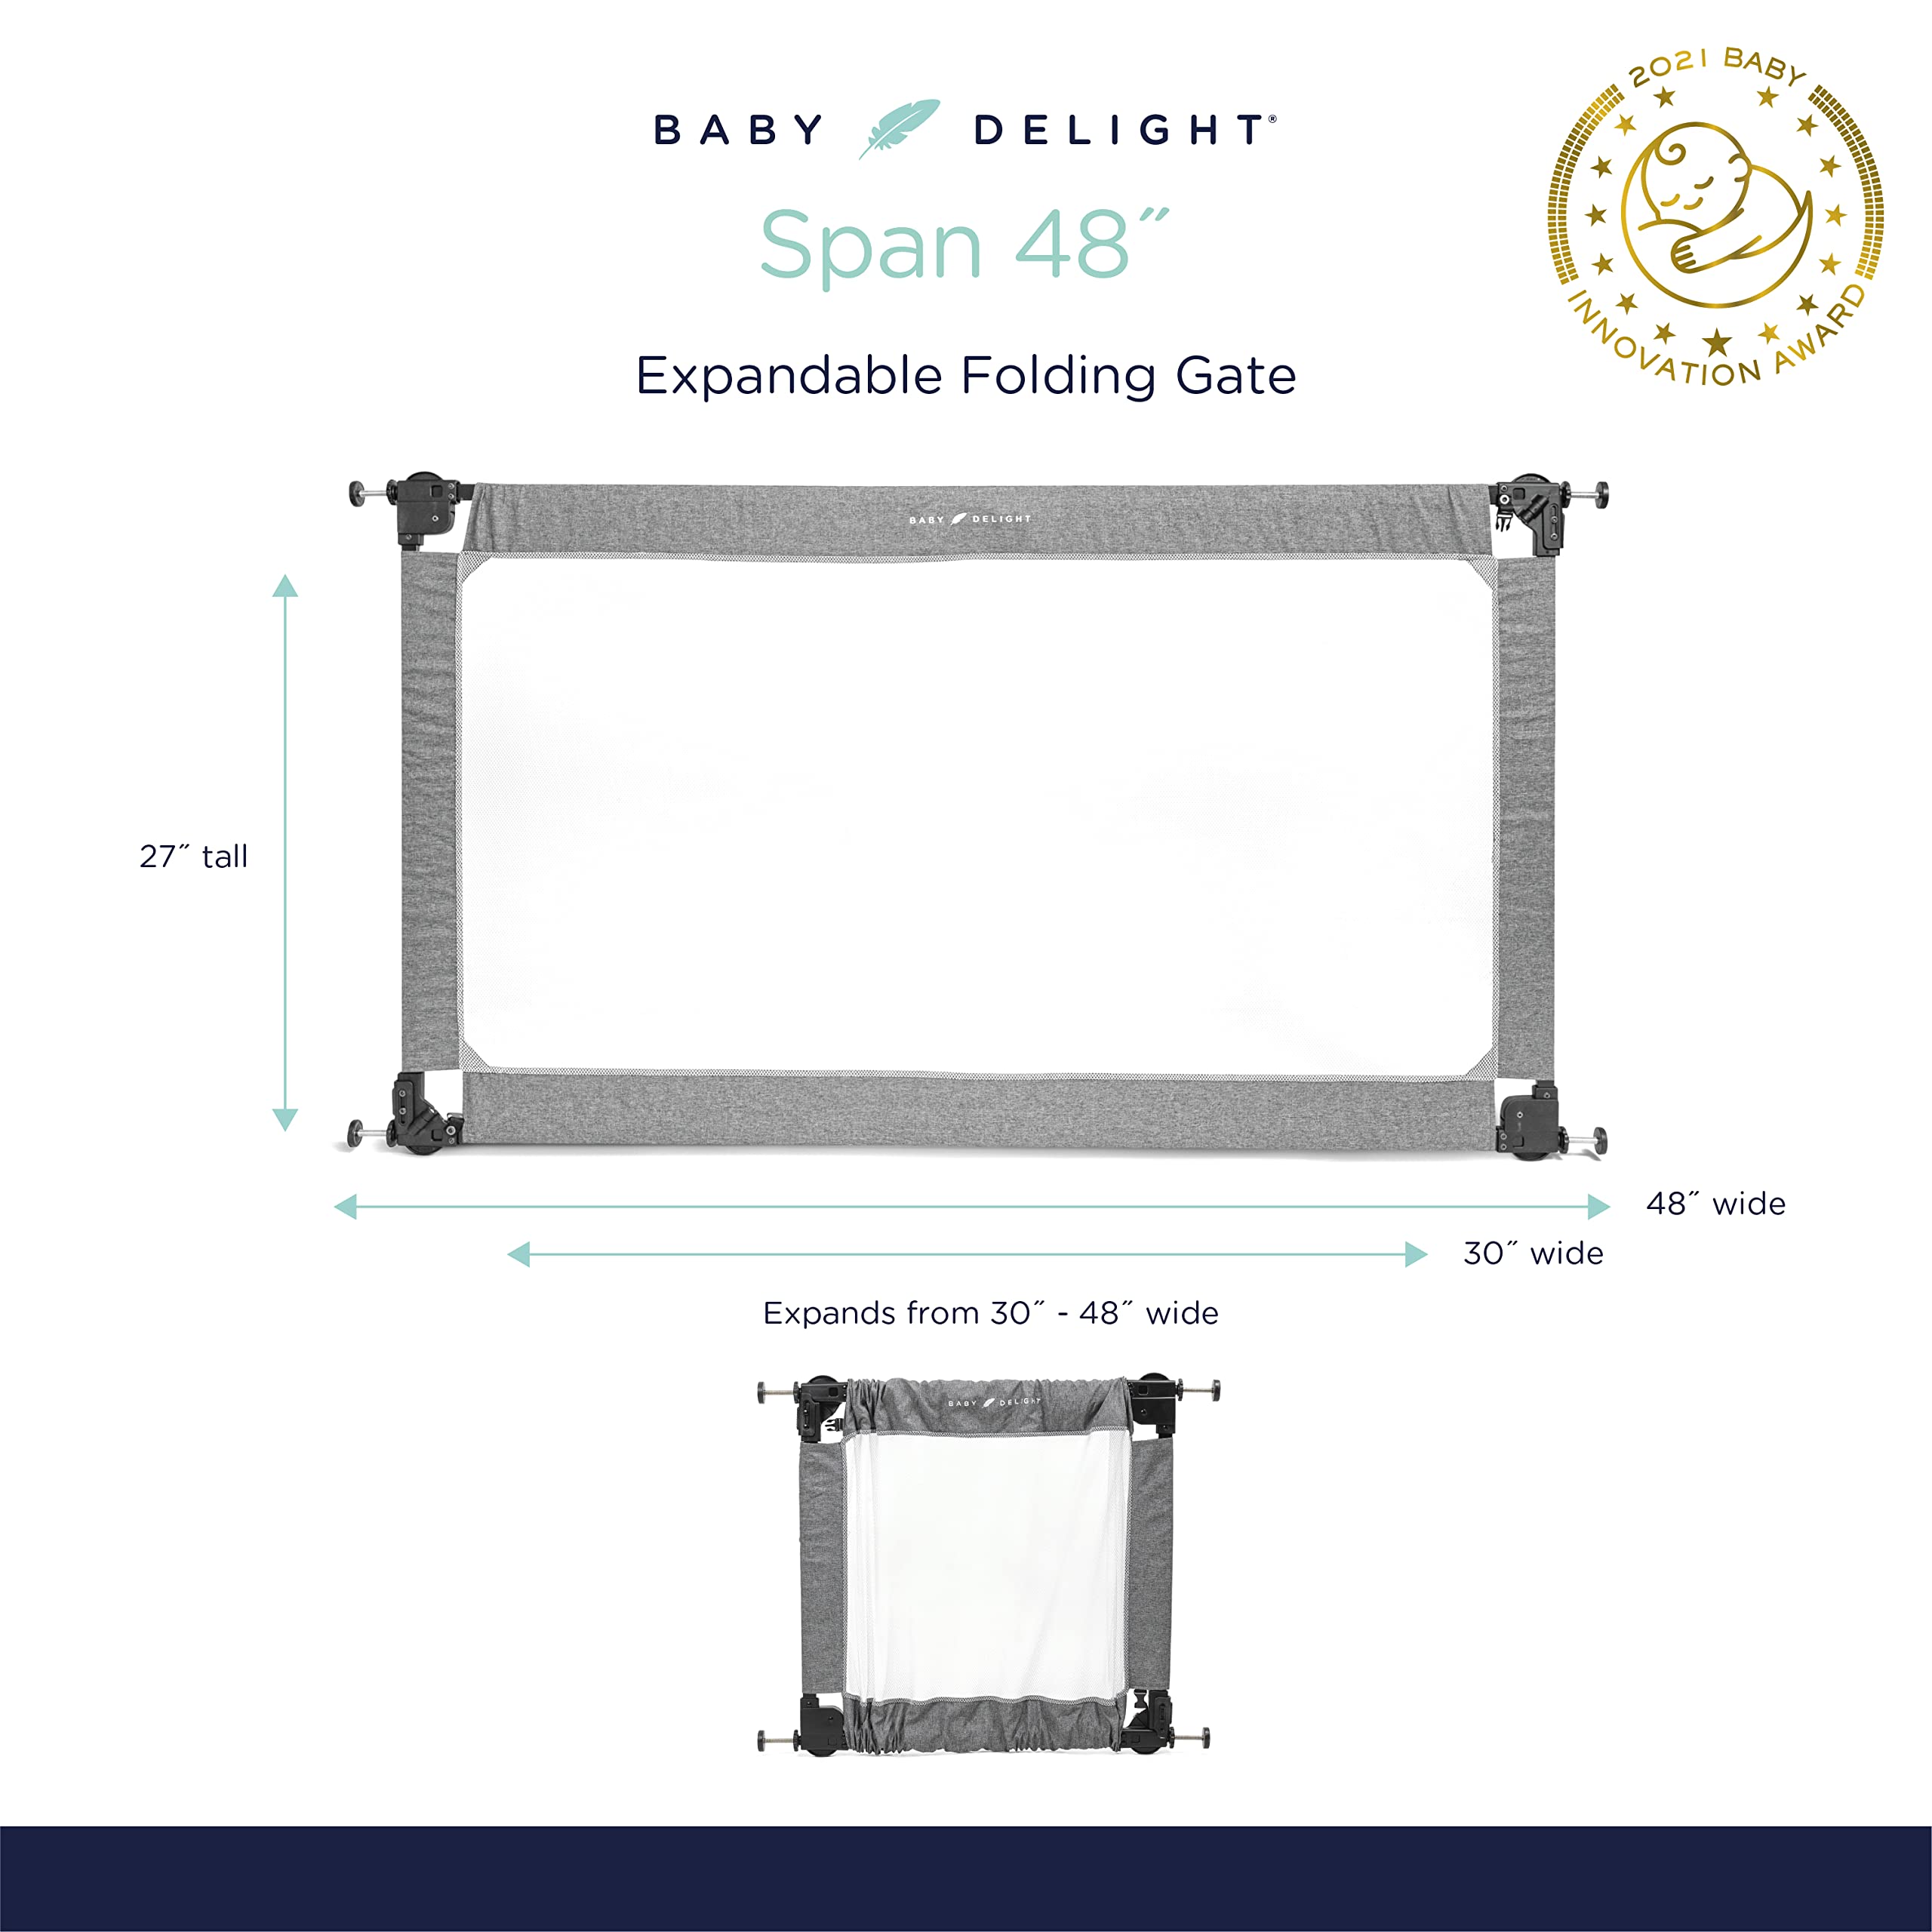 Baby Delight Go with Me Portable Mesh Baby Gate | Span 30-48" Expandable Folding Gate | Pressure Mounted | Charcoal Tweed